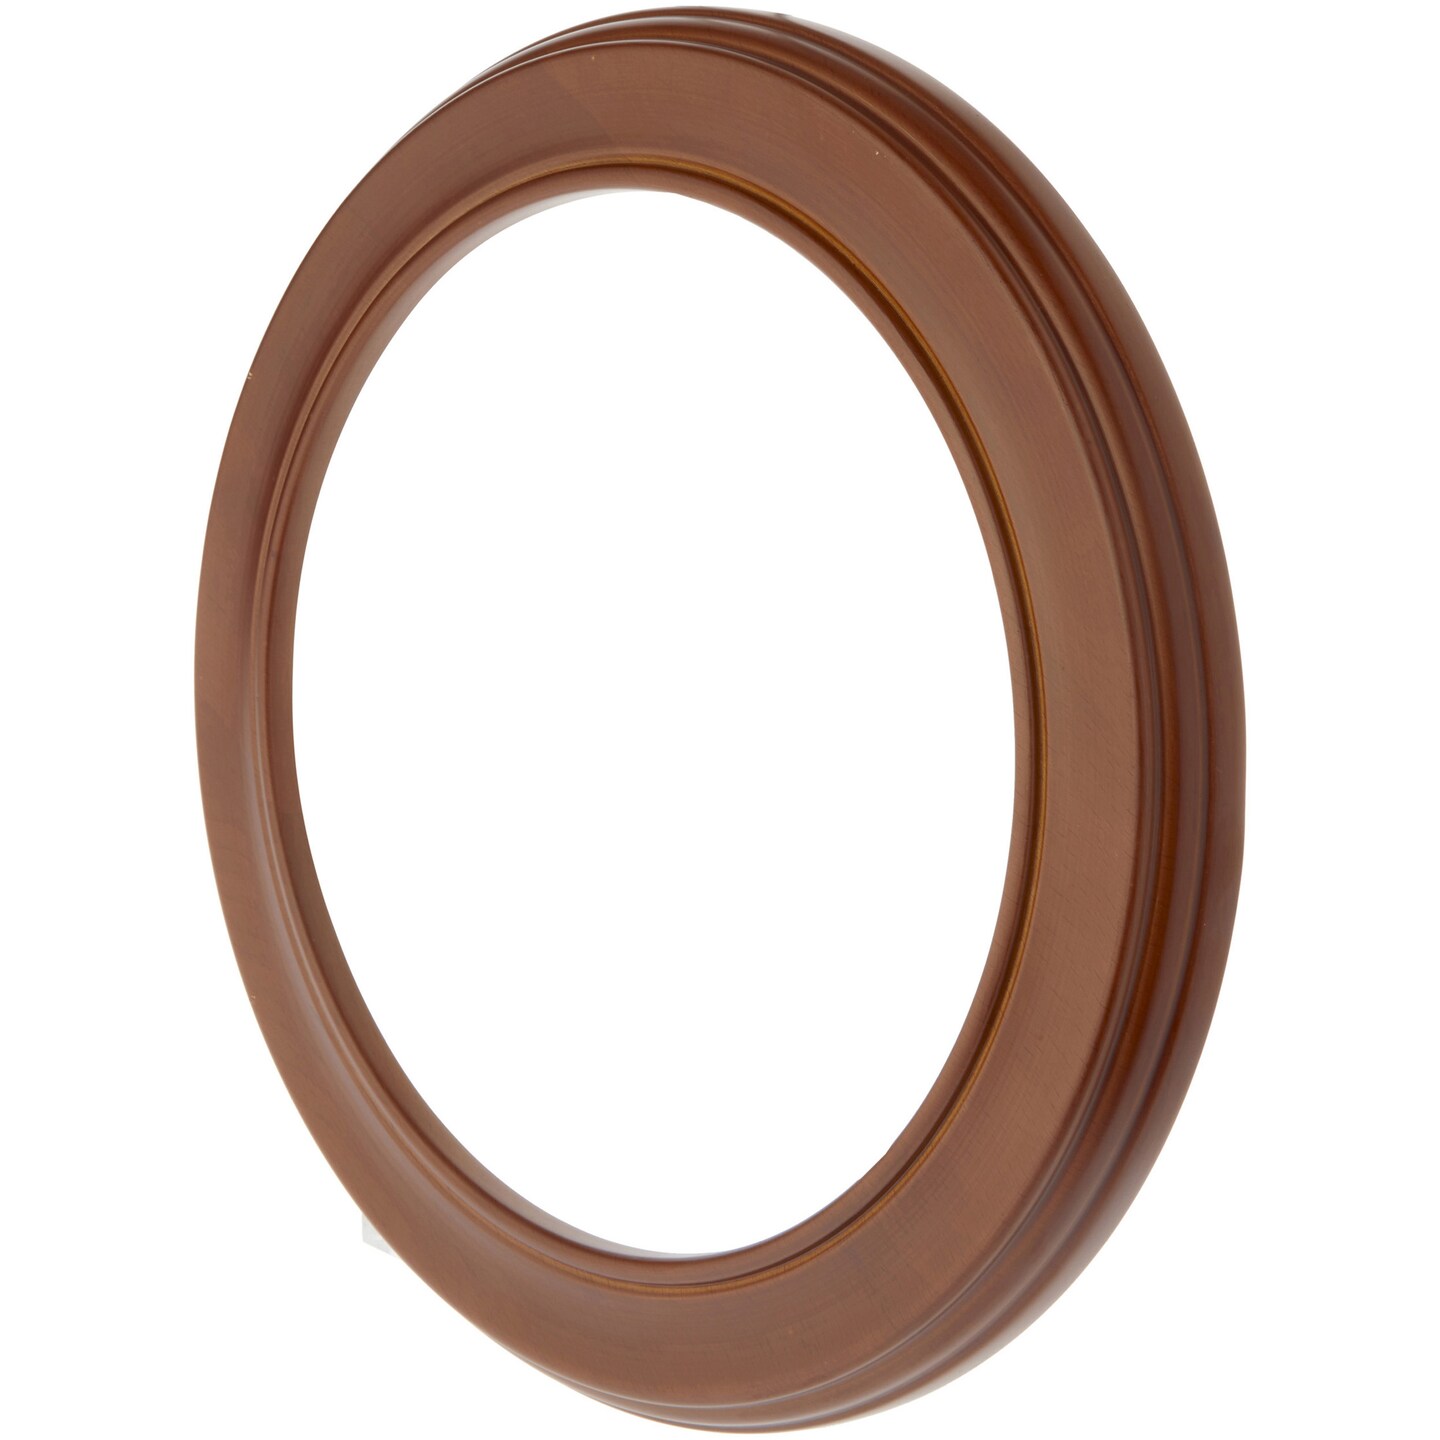 Bard's Walnut Wall Mountable Plate Frame with Gold Strip